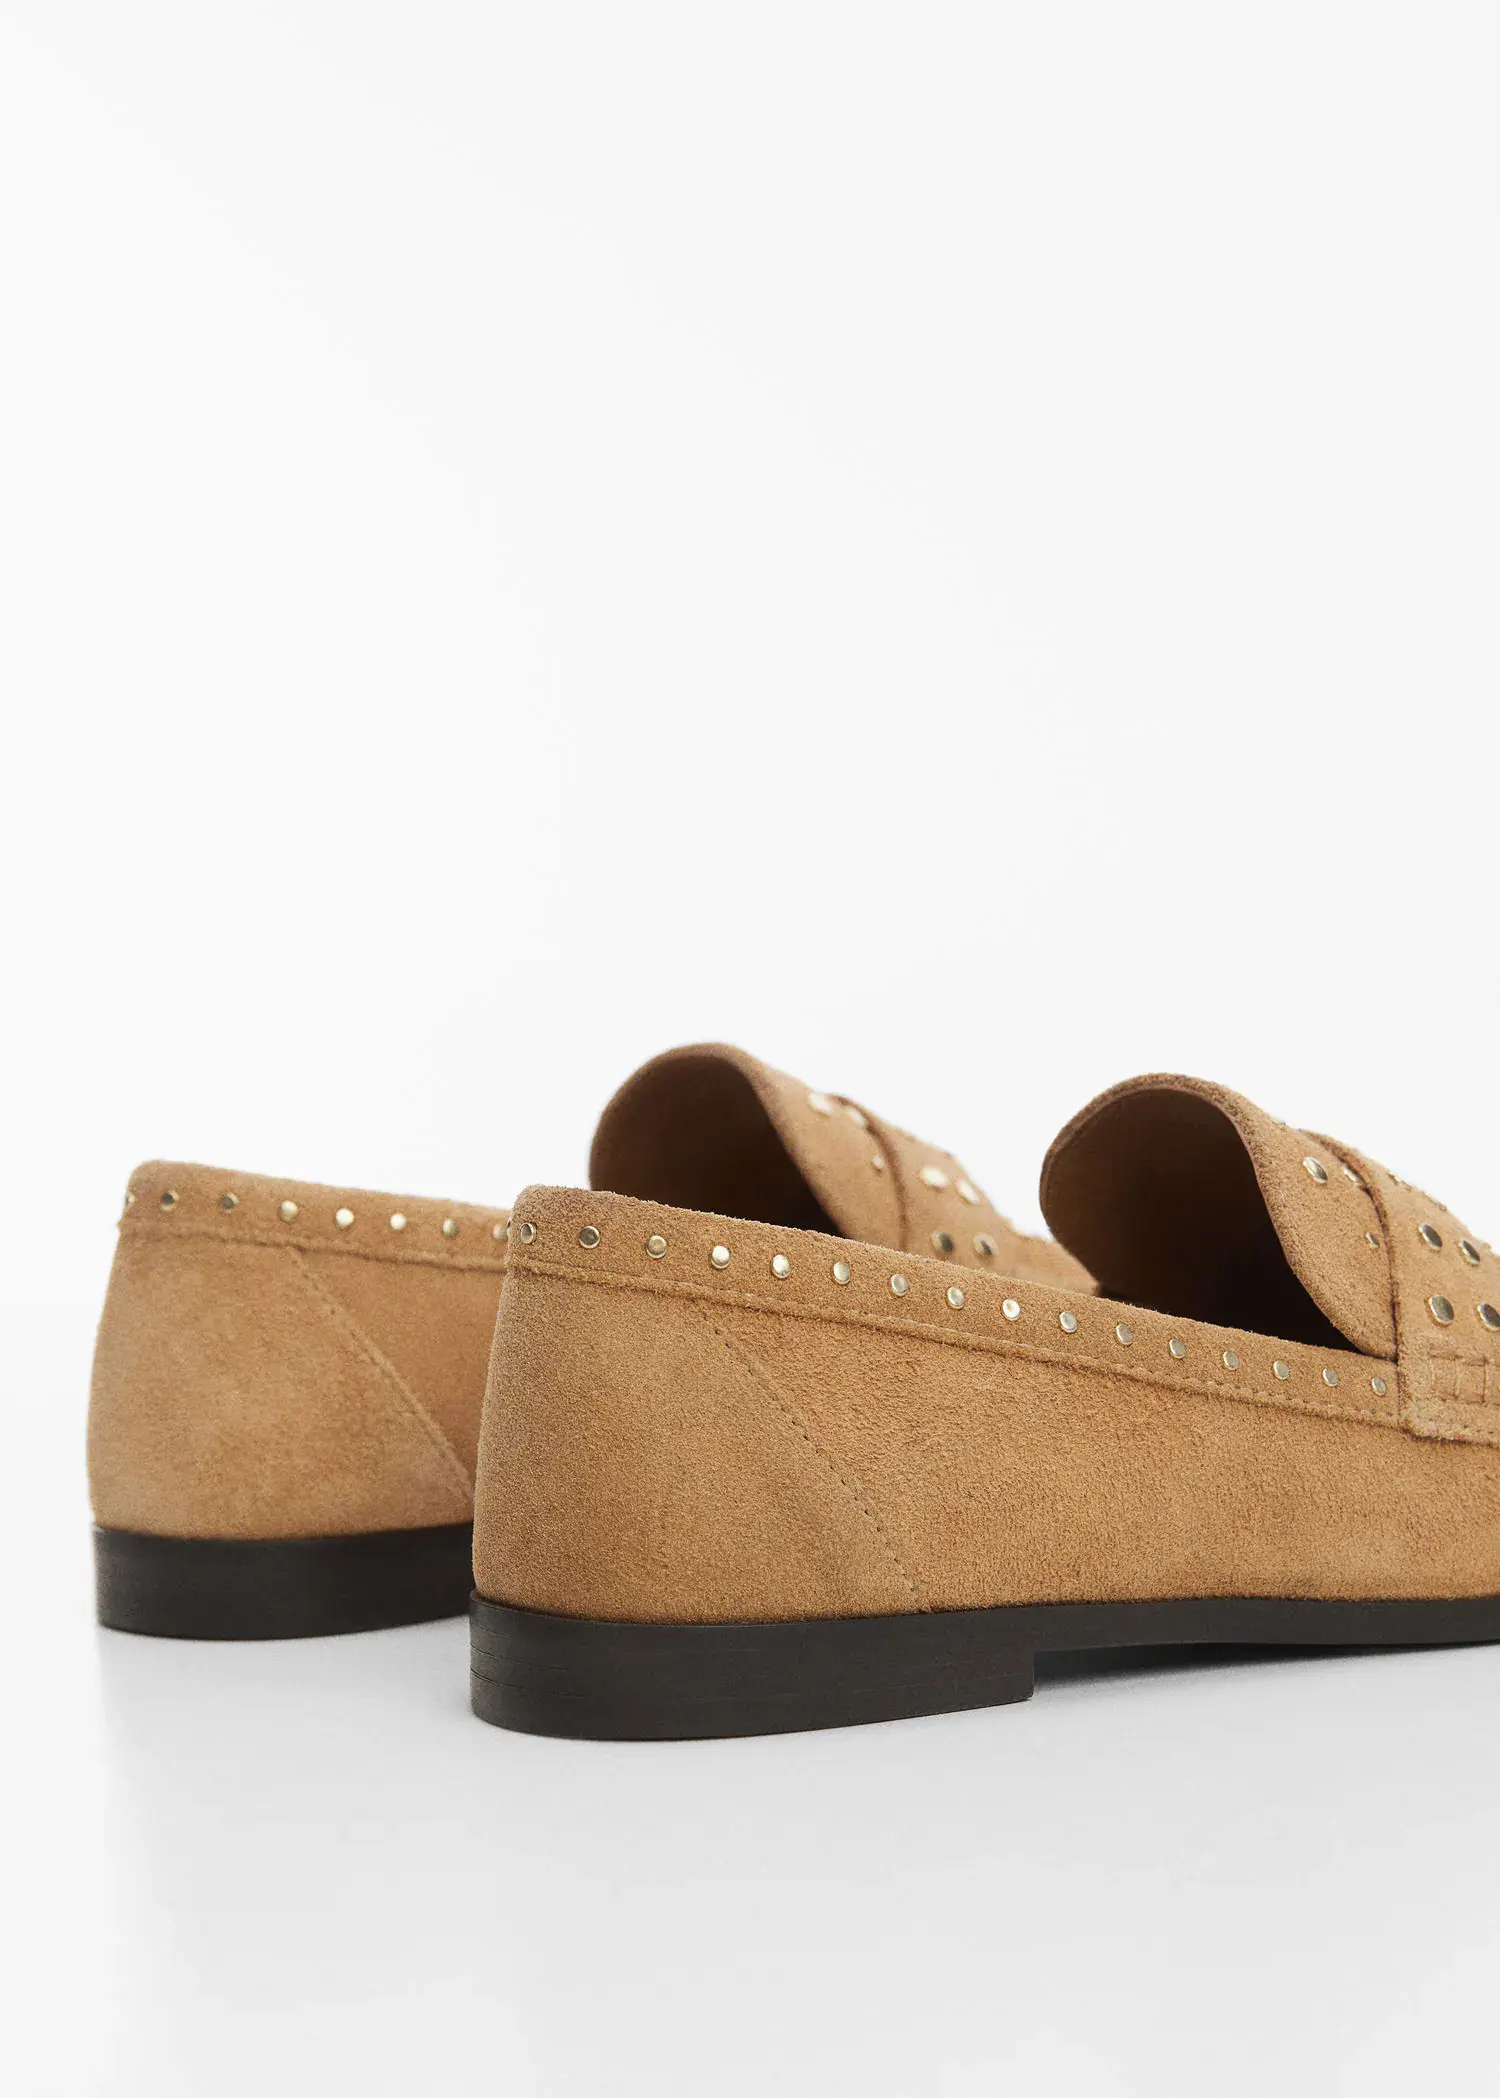 Mango Studded leather loafers. 3